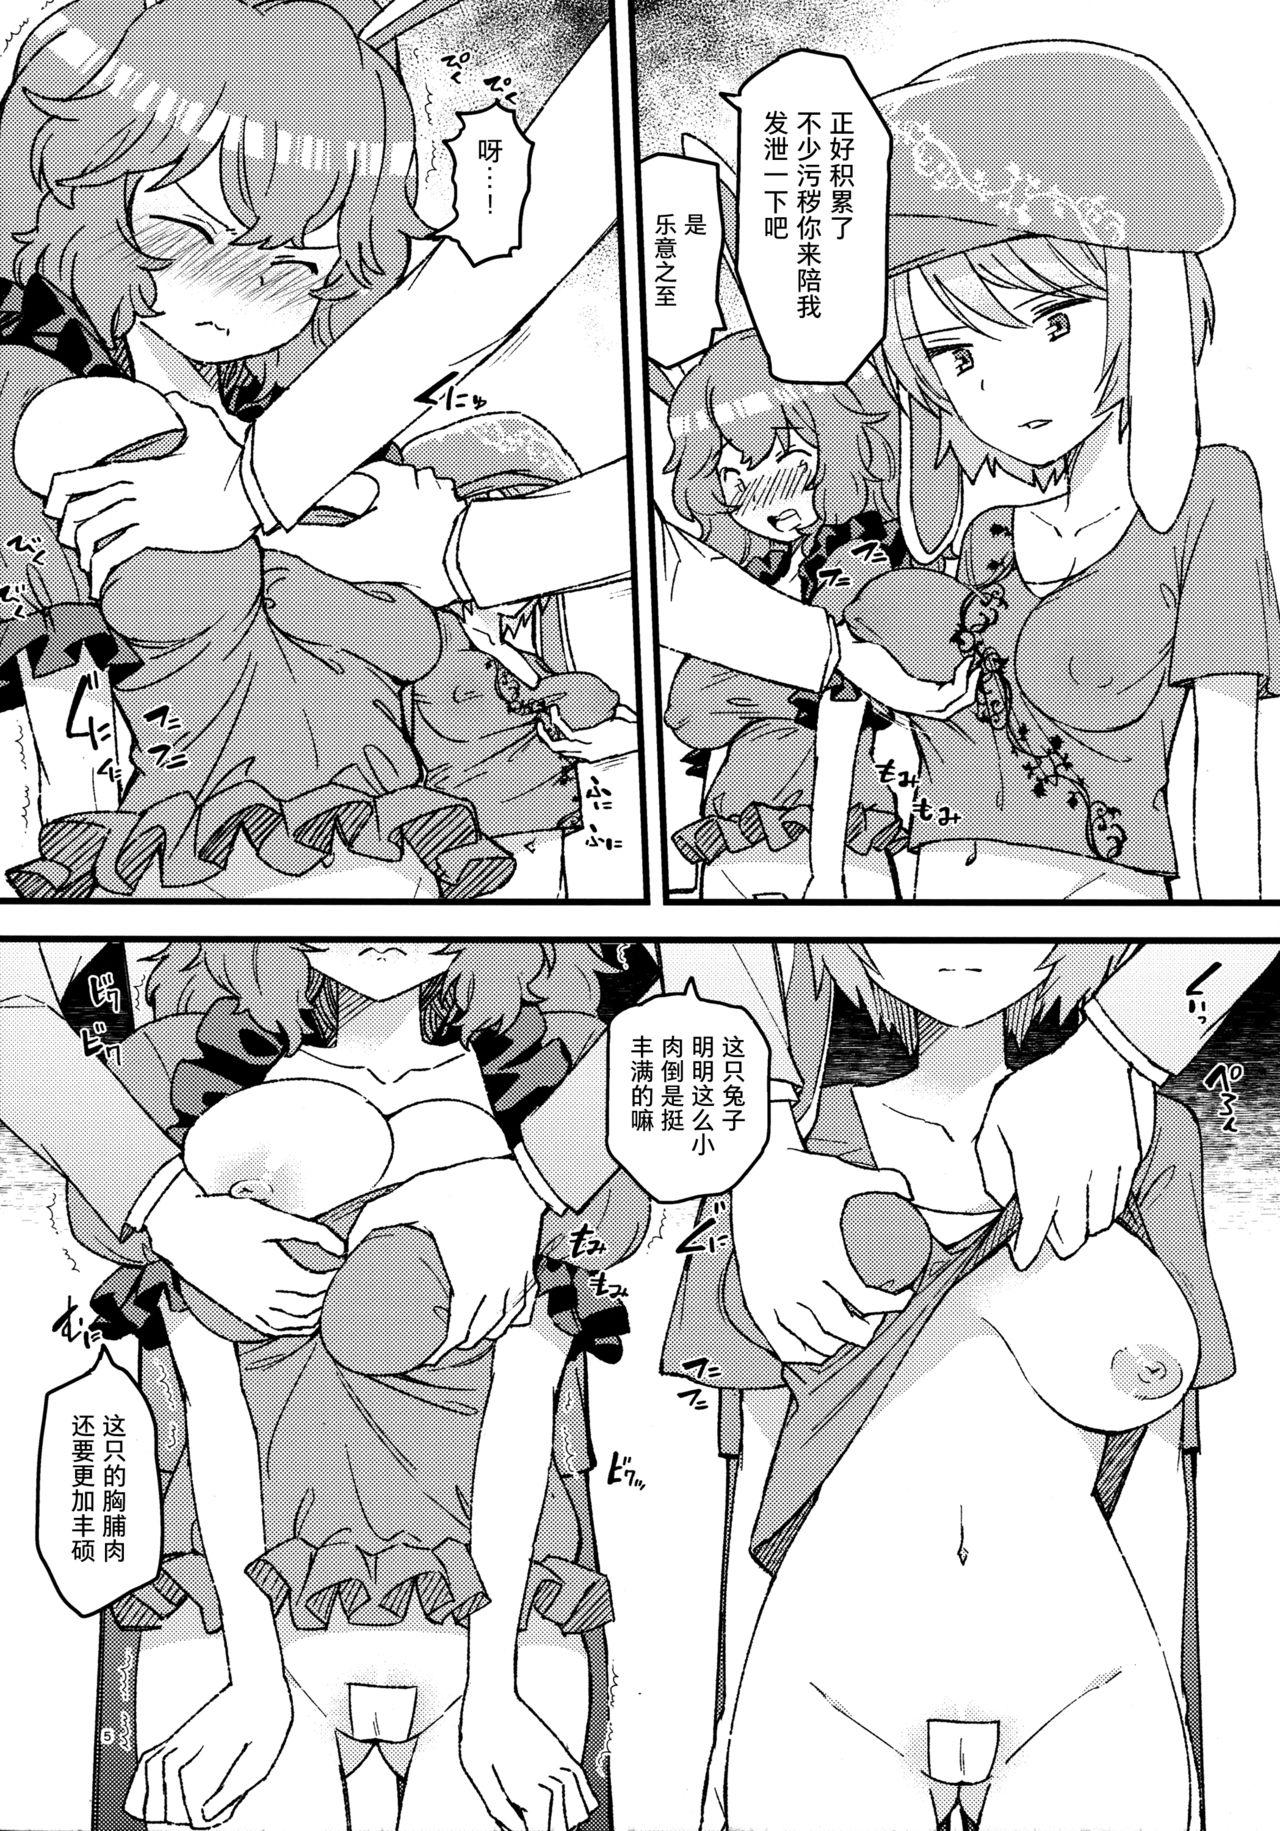 Spooning No pants rabbit - Touhou project Por - Page 5